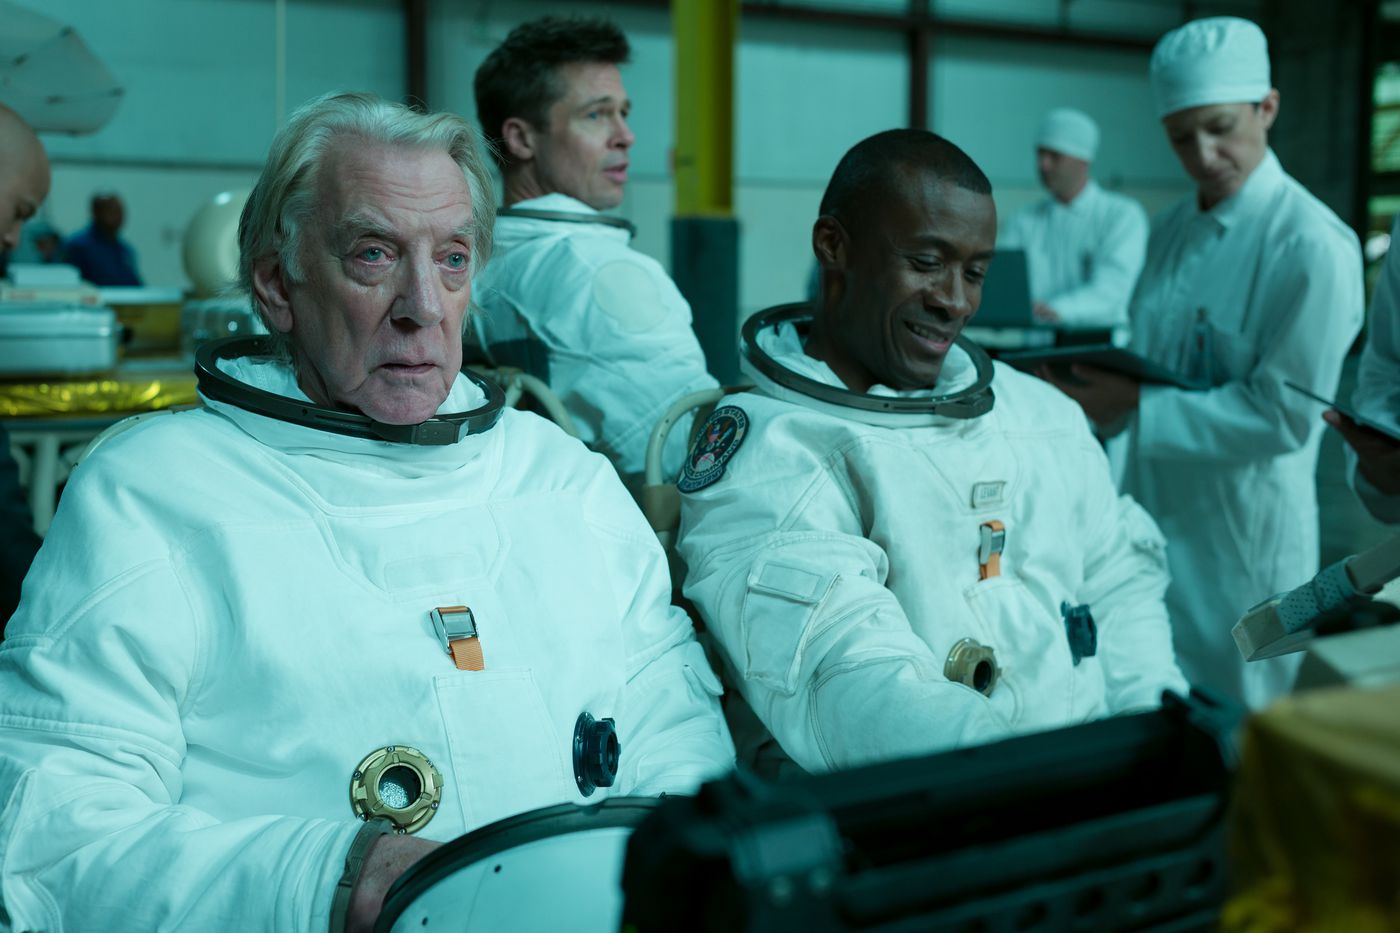 Ad Astra Movie Review